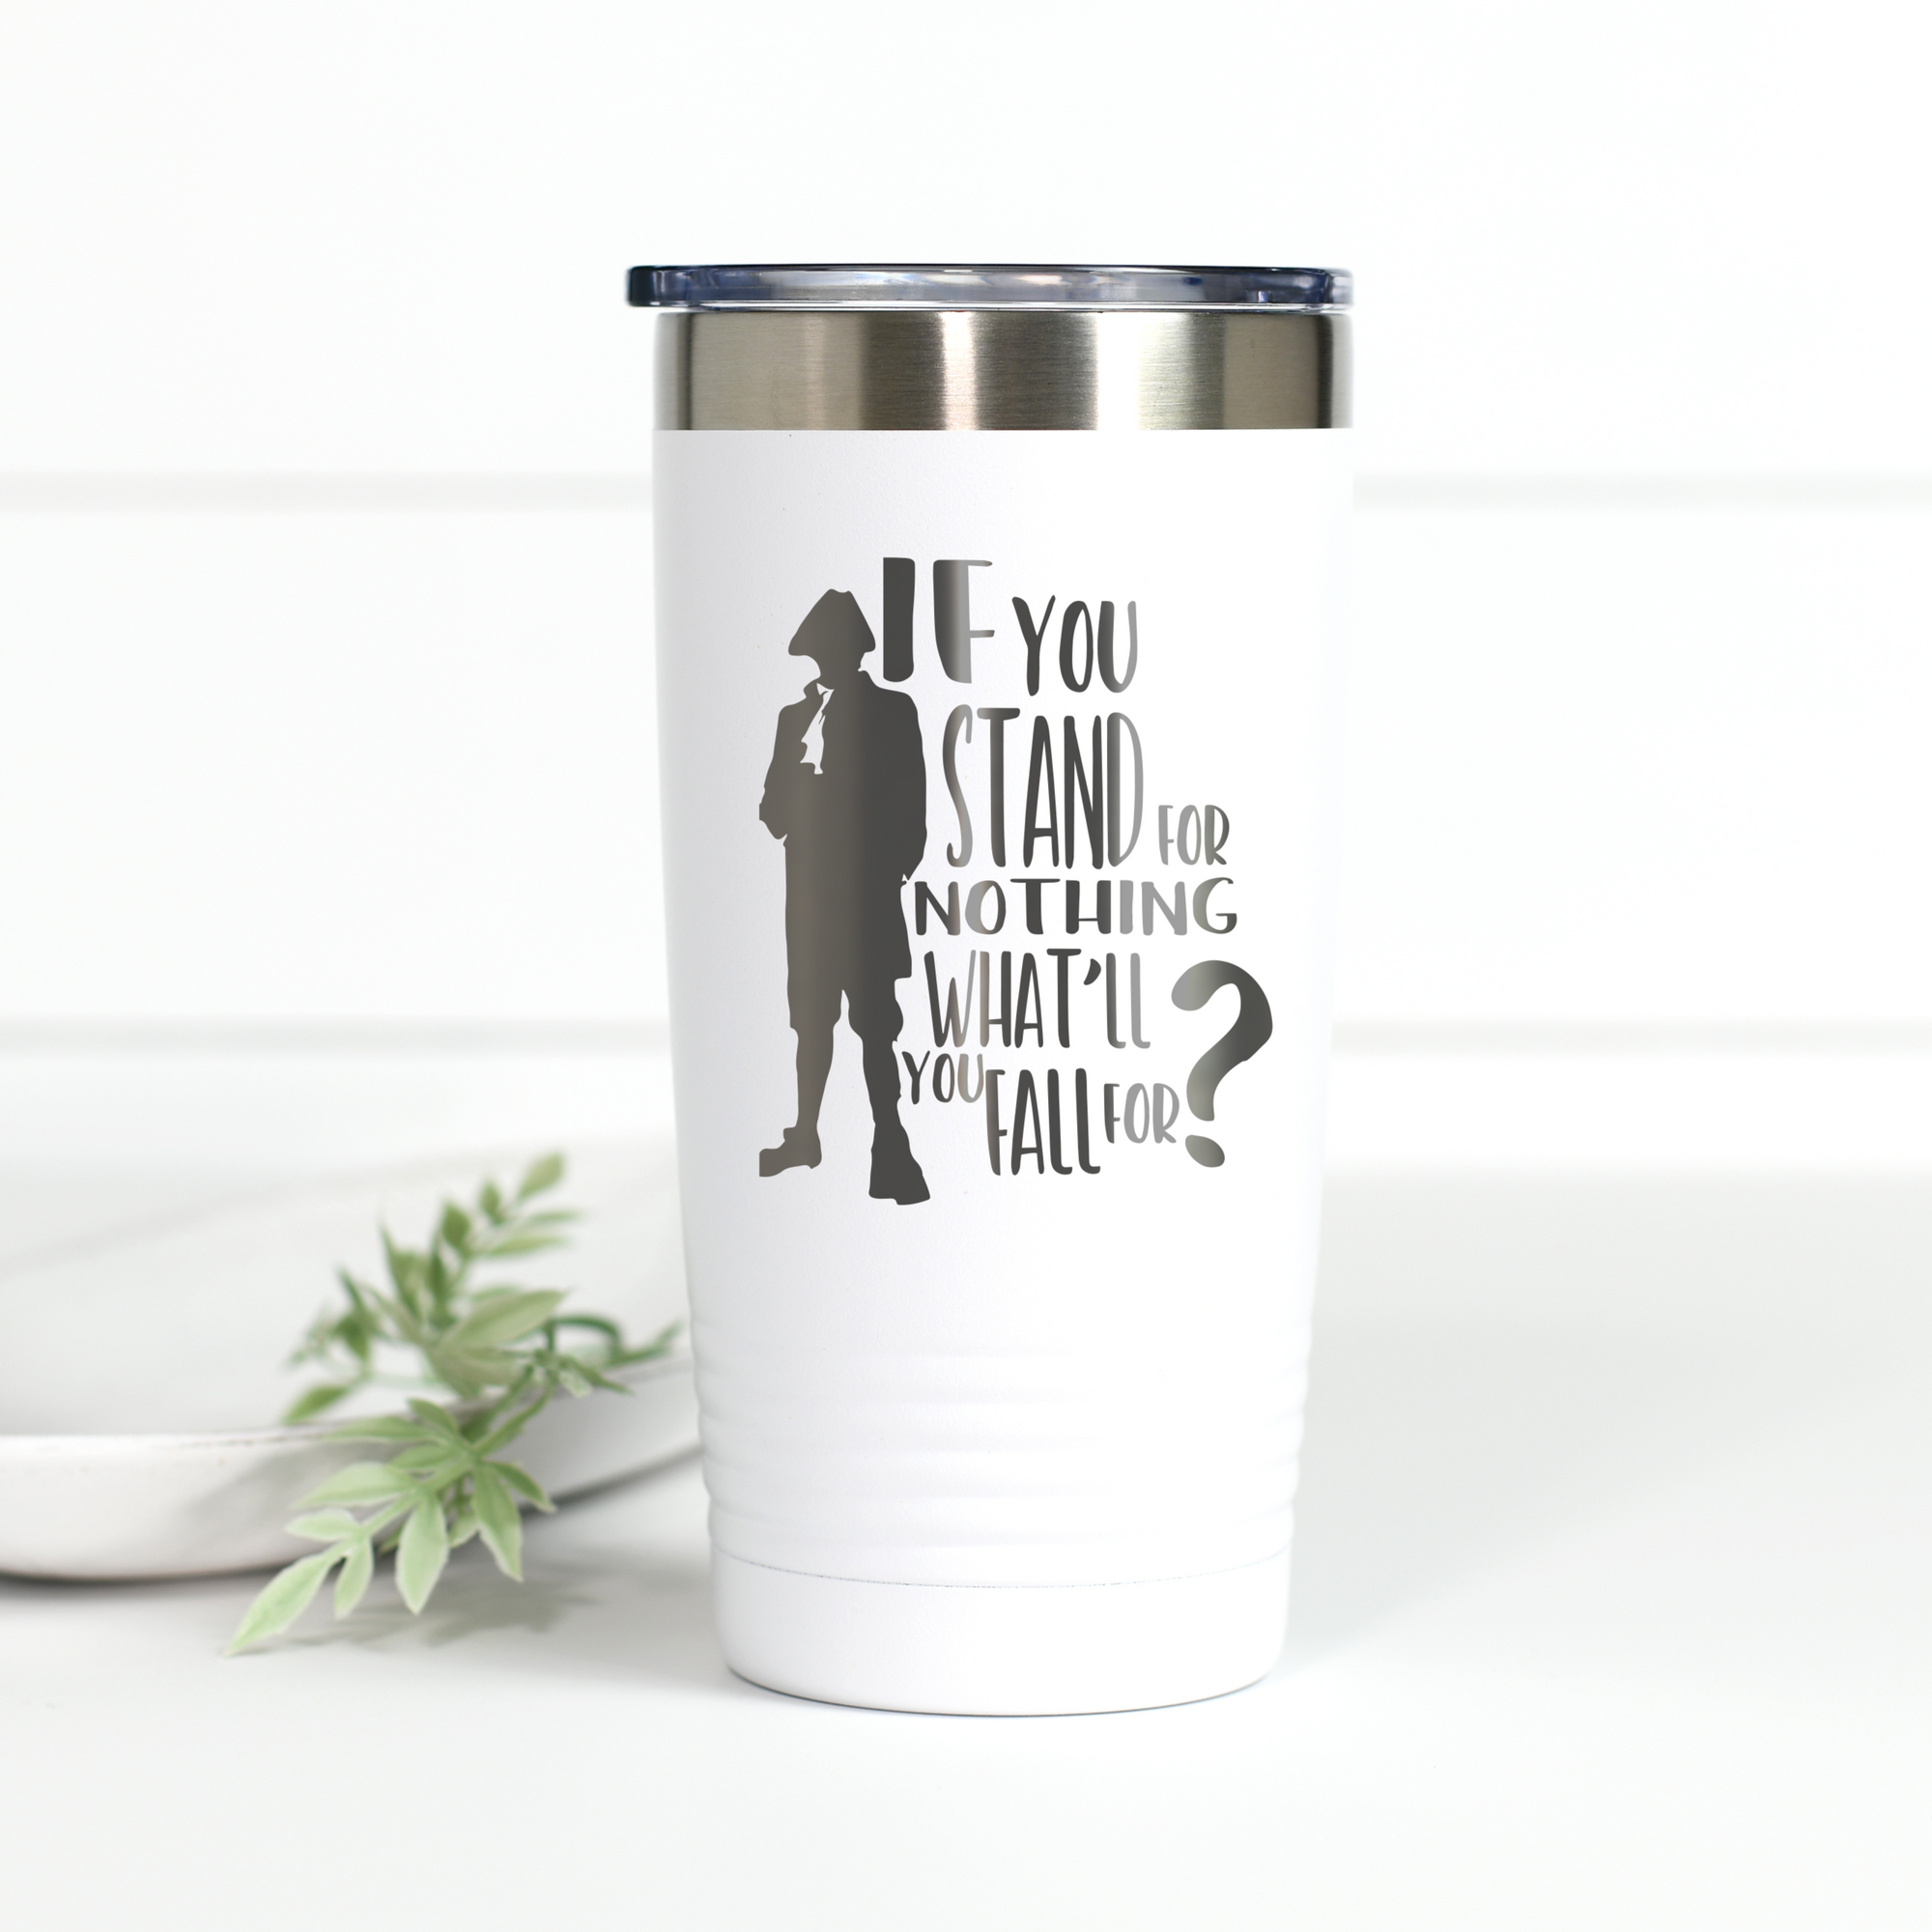 Hamilton If You Stand for Nothing 20 oz Engraved Tumbler